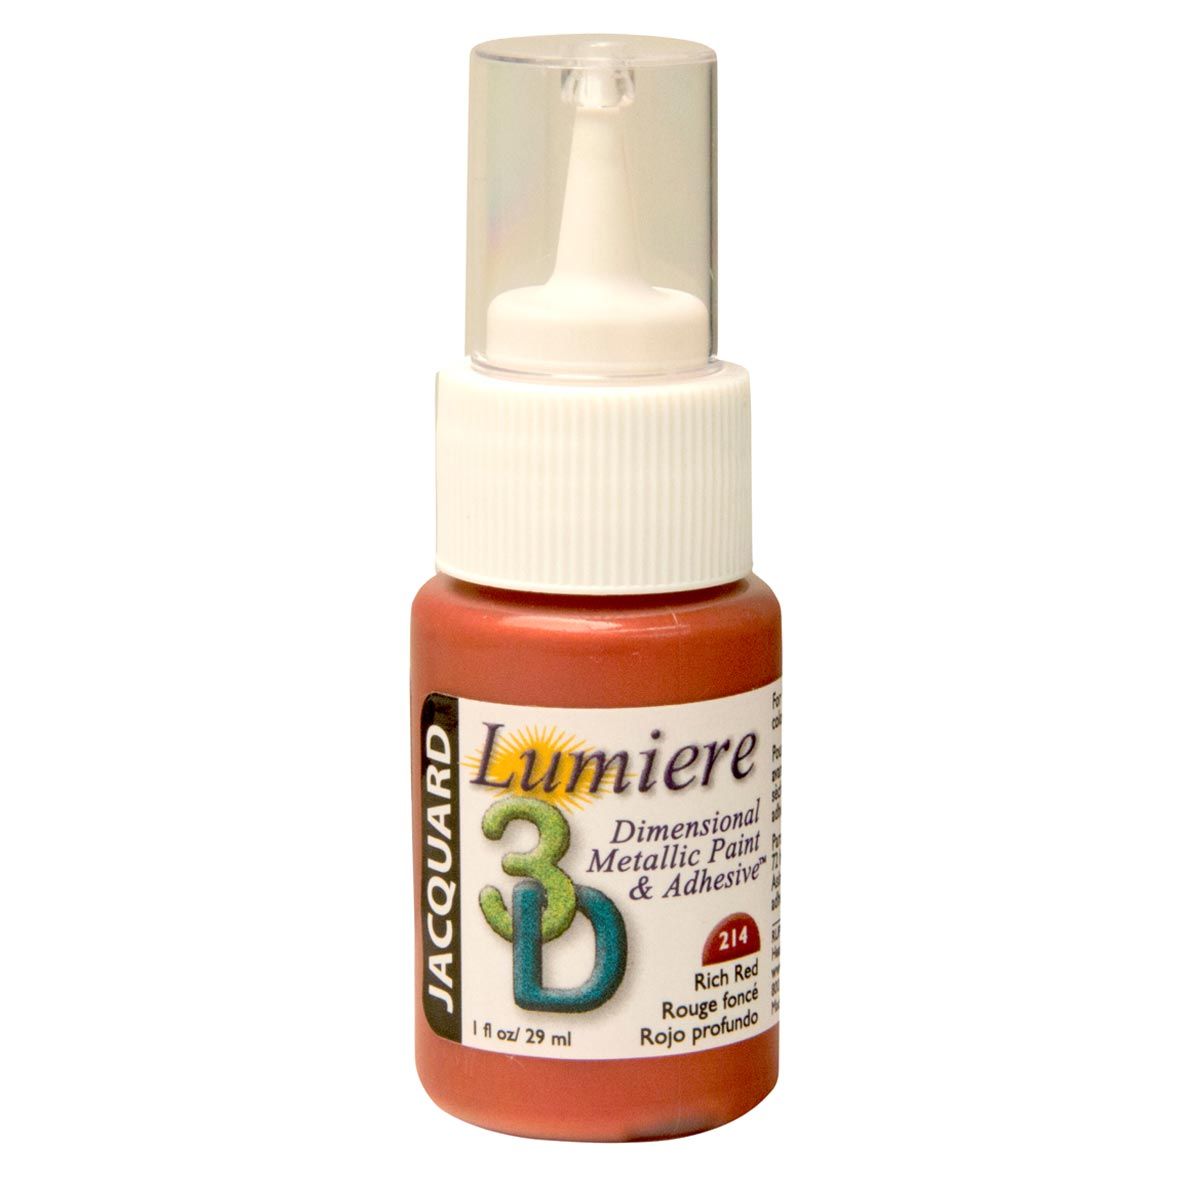 Lumiere 3D Metallic Paint & Adhesive, Rich Red 1oz